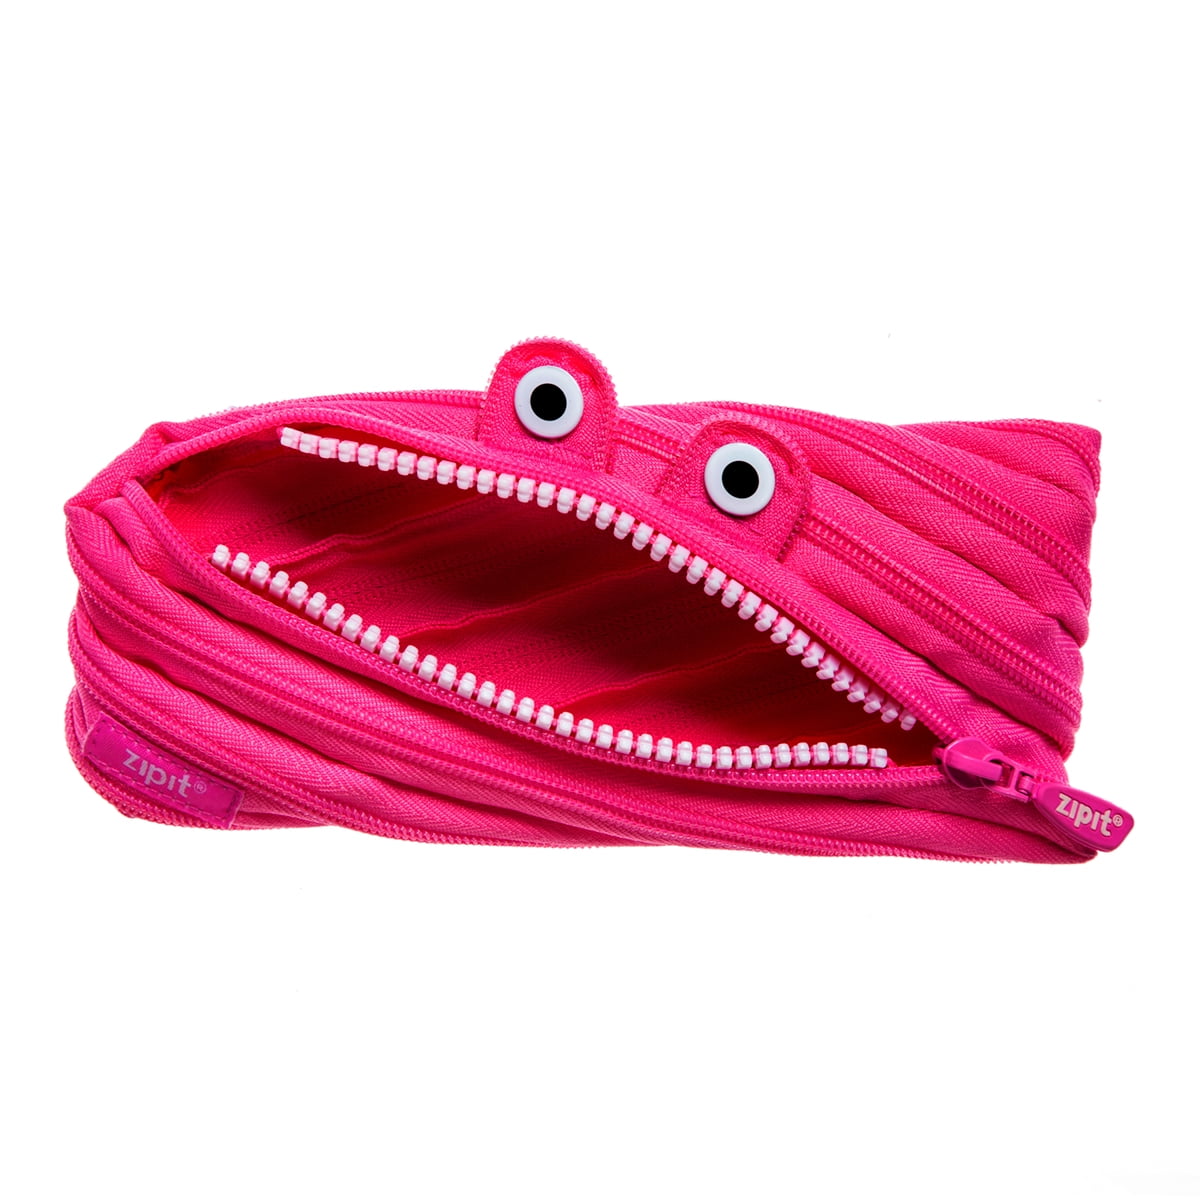 Neon Pink Pencil Pouch